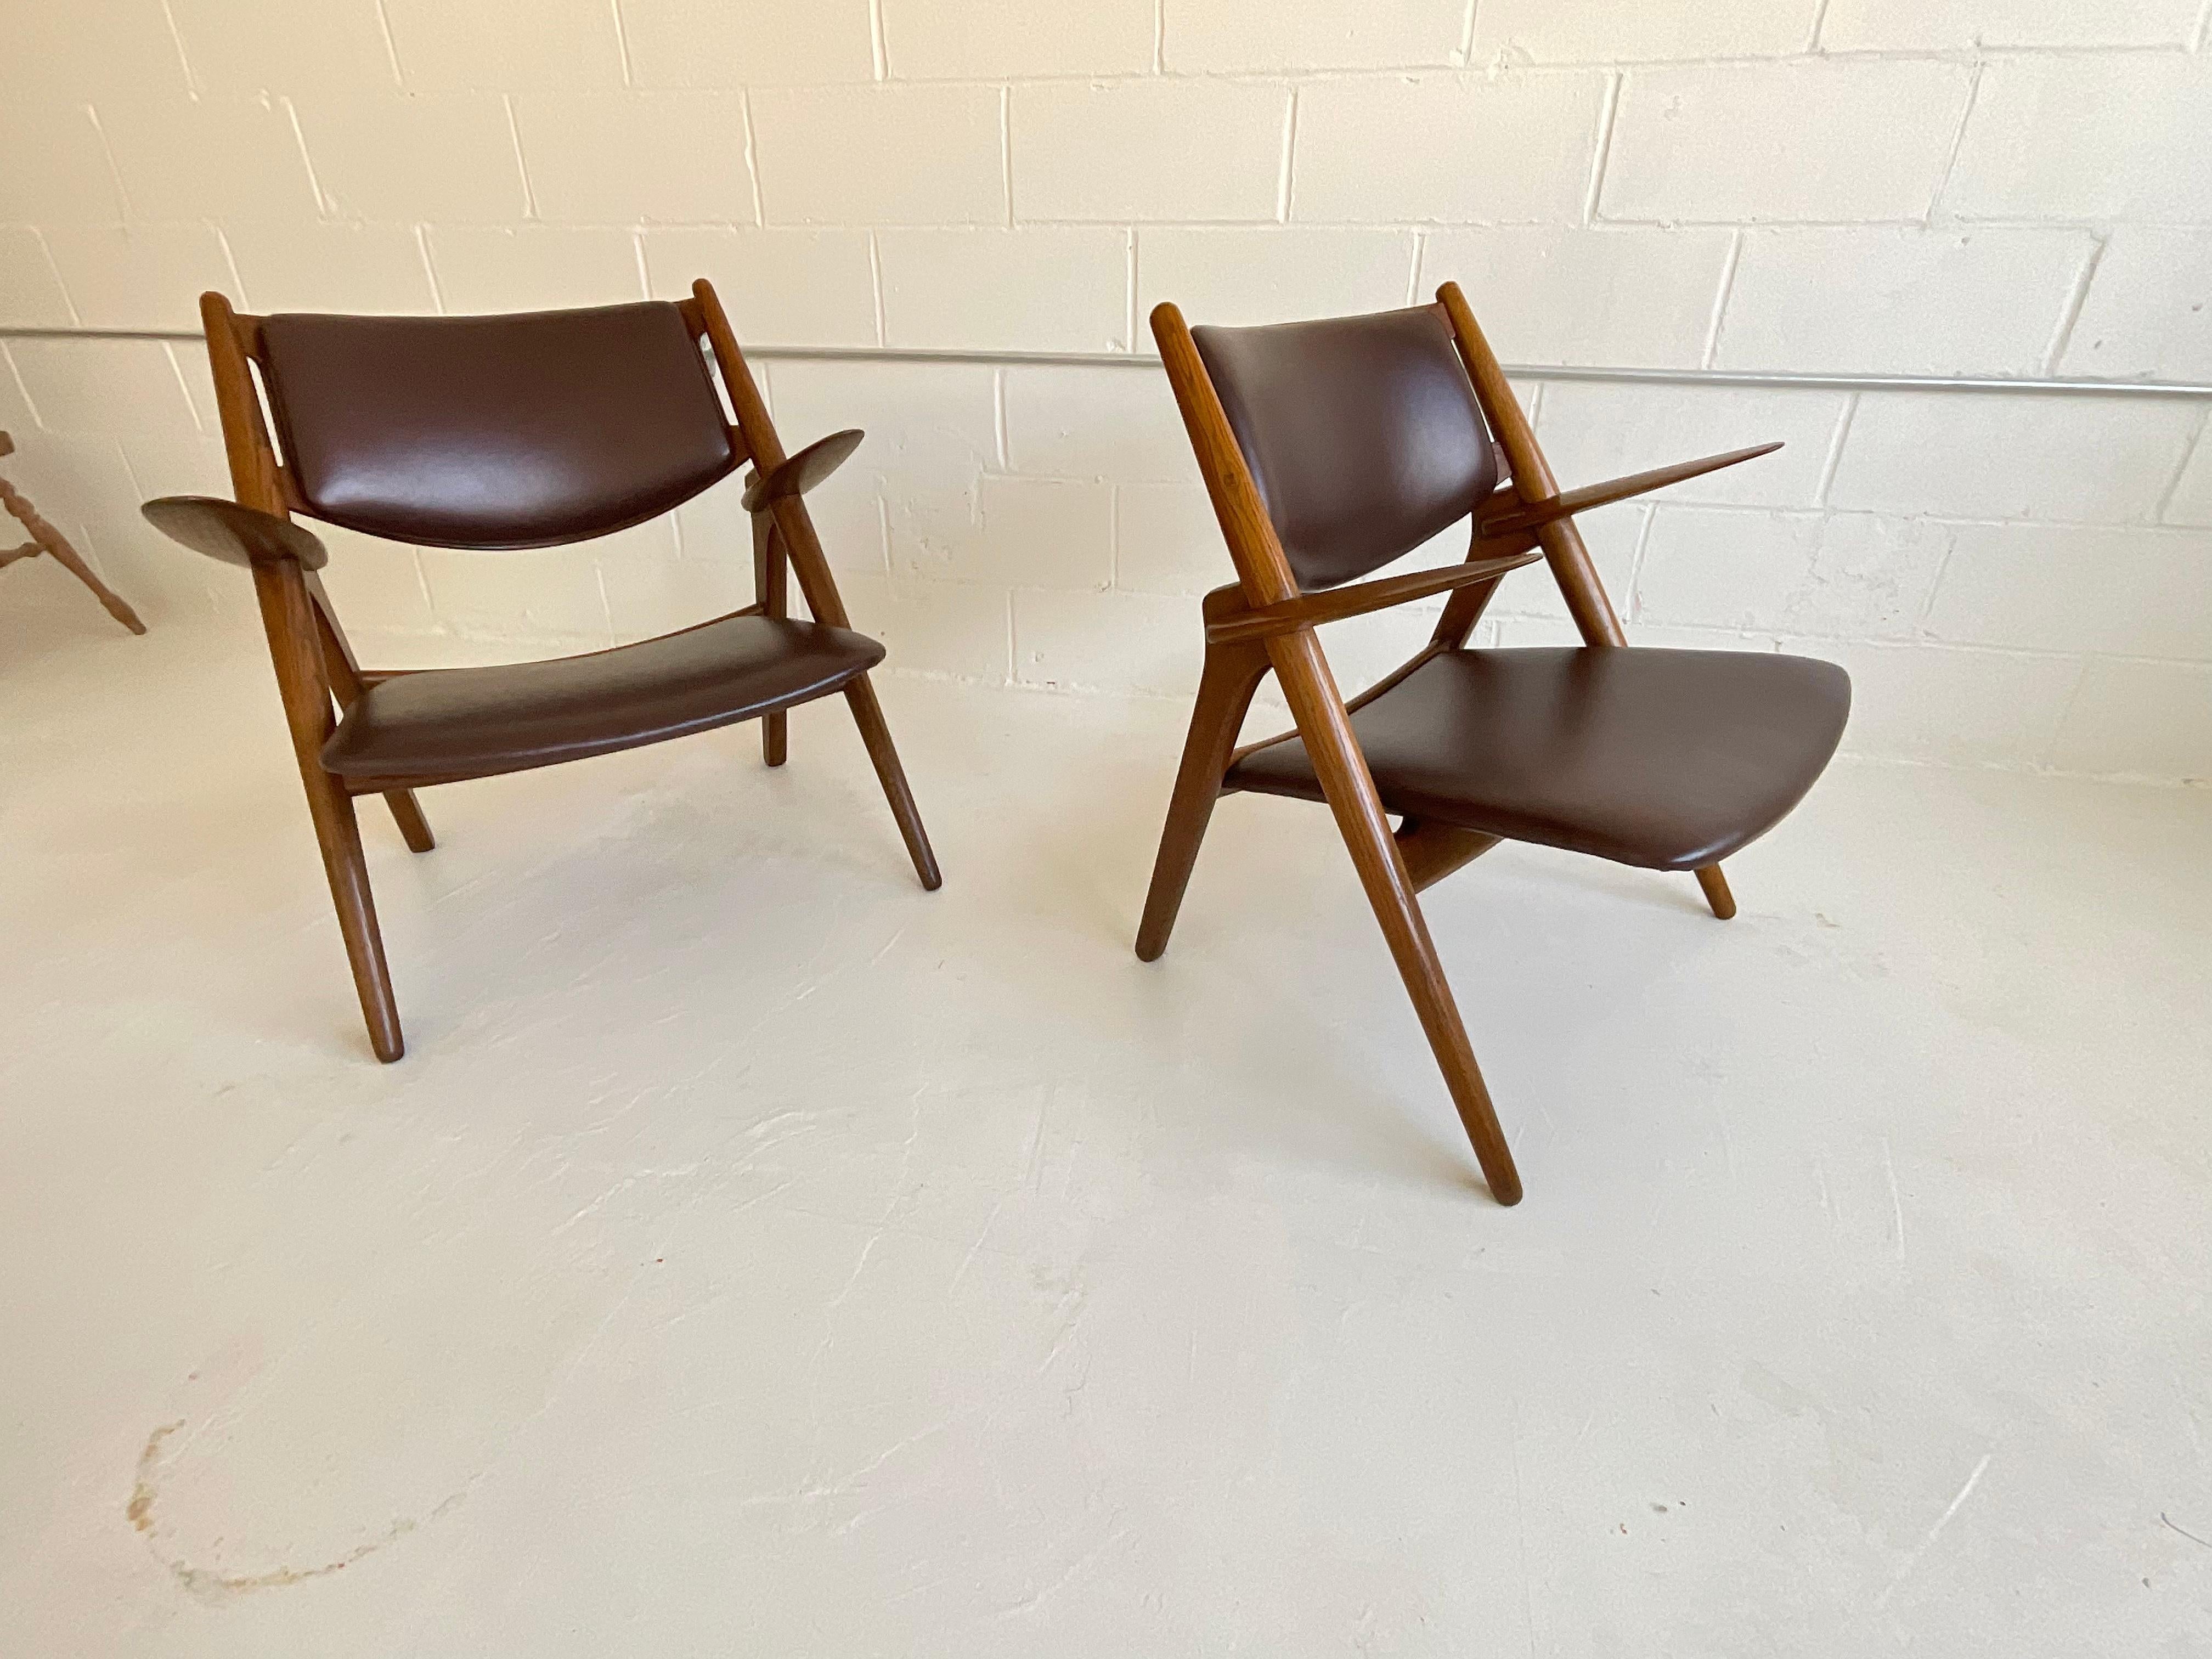 An icon of 20th century seating design still celebrated 72 years after its introduction—the Sawbuck chair by Hans Wegner for Carl Hansen, 1951. Montaperto Studios is pleased to offer a vintage pair in Oak and top grain brown Italian leather. Very